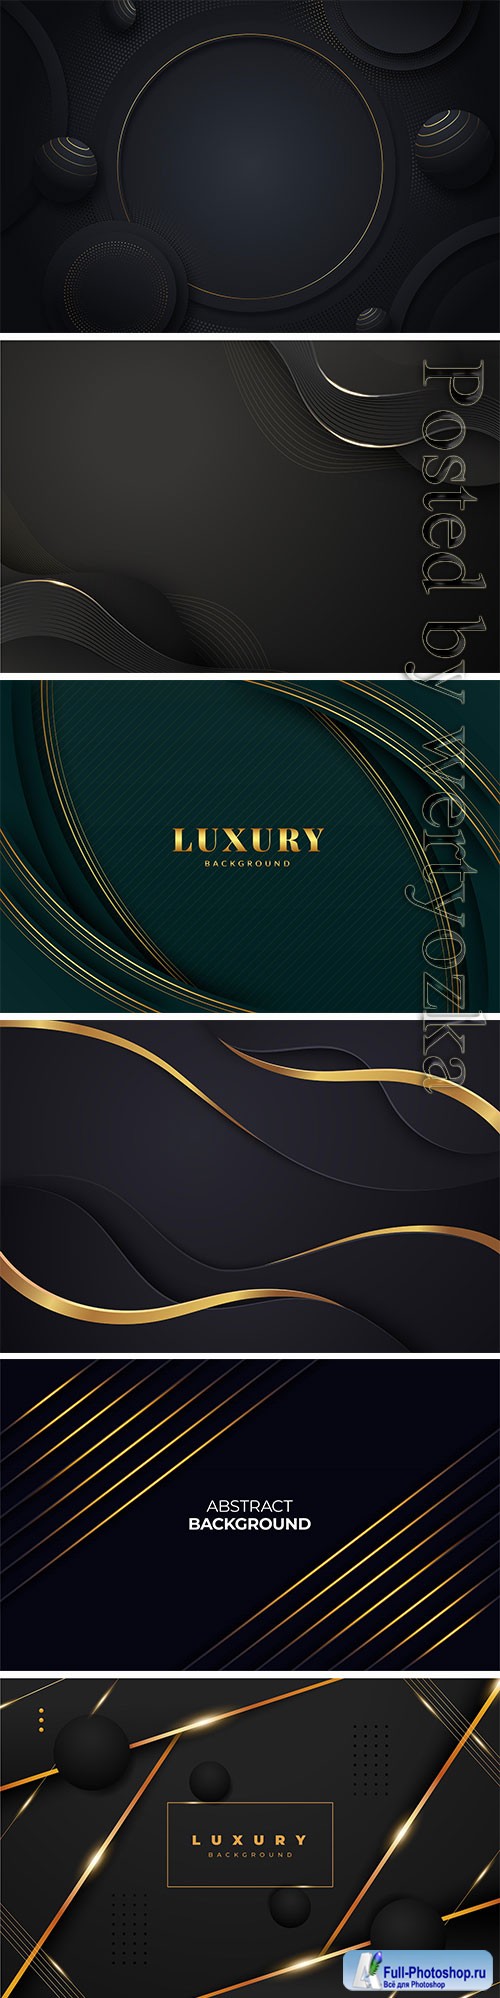 Paper style luxury vector background